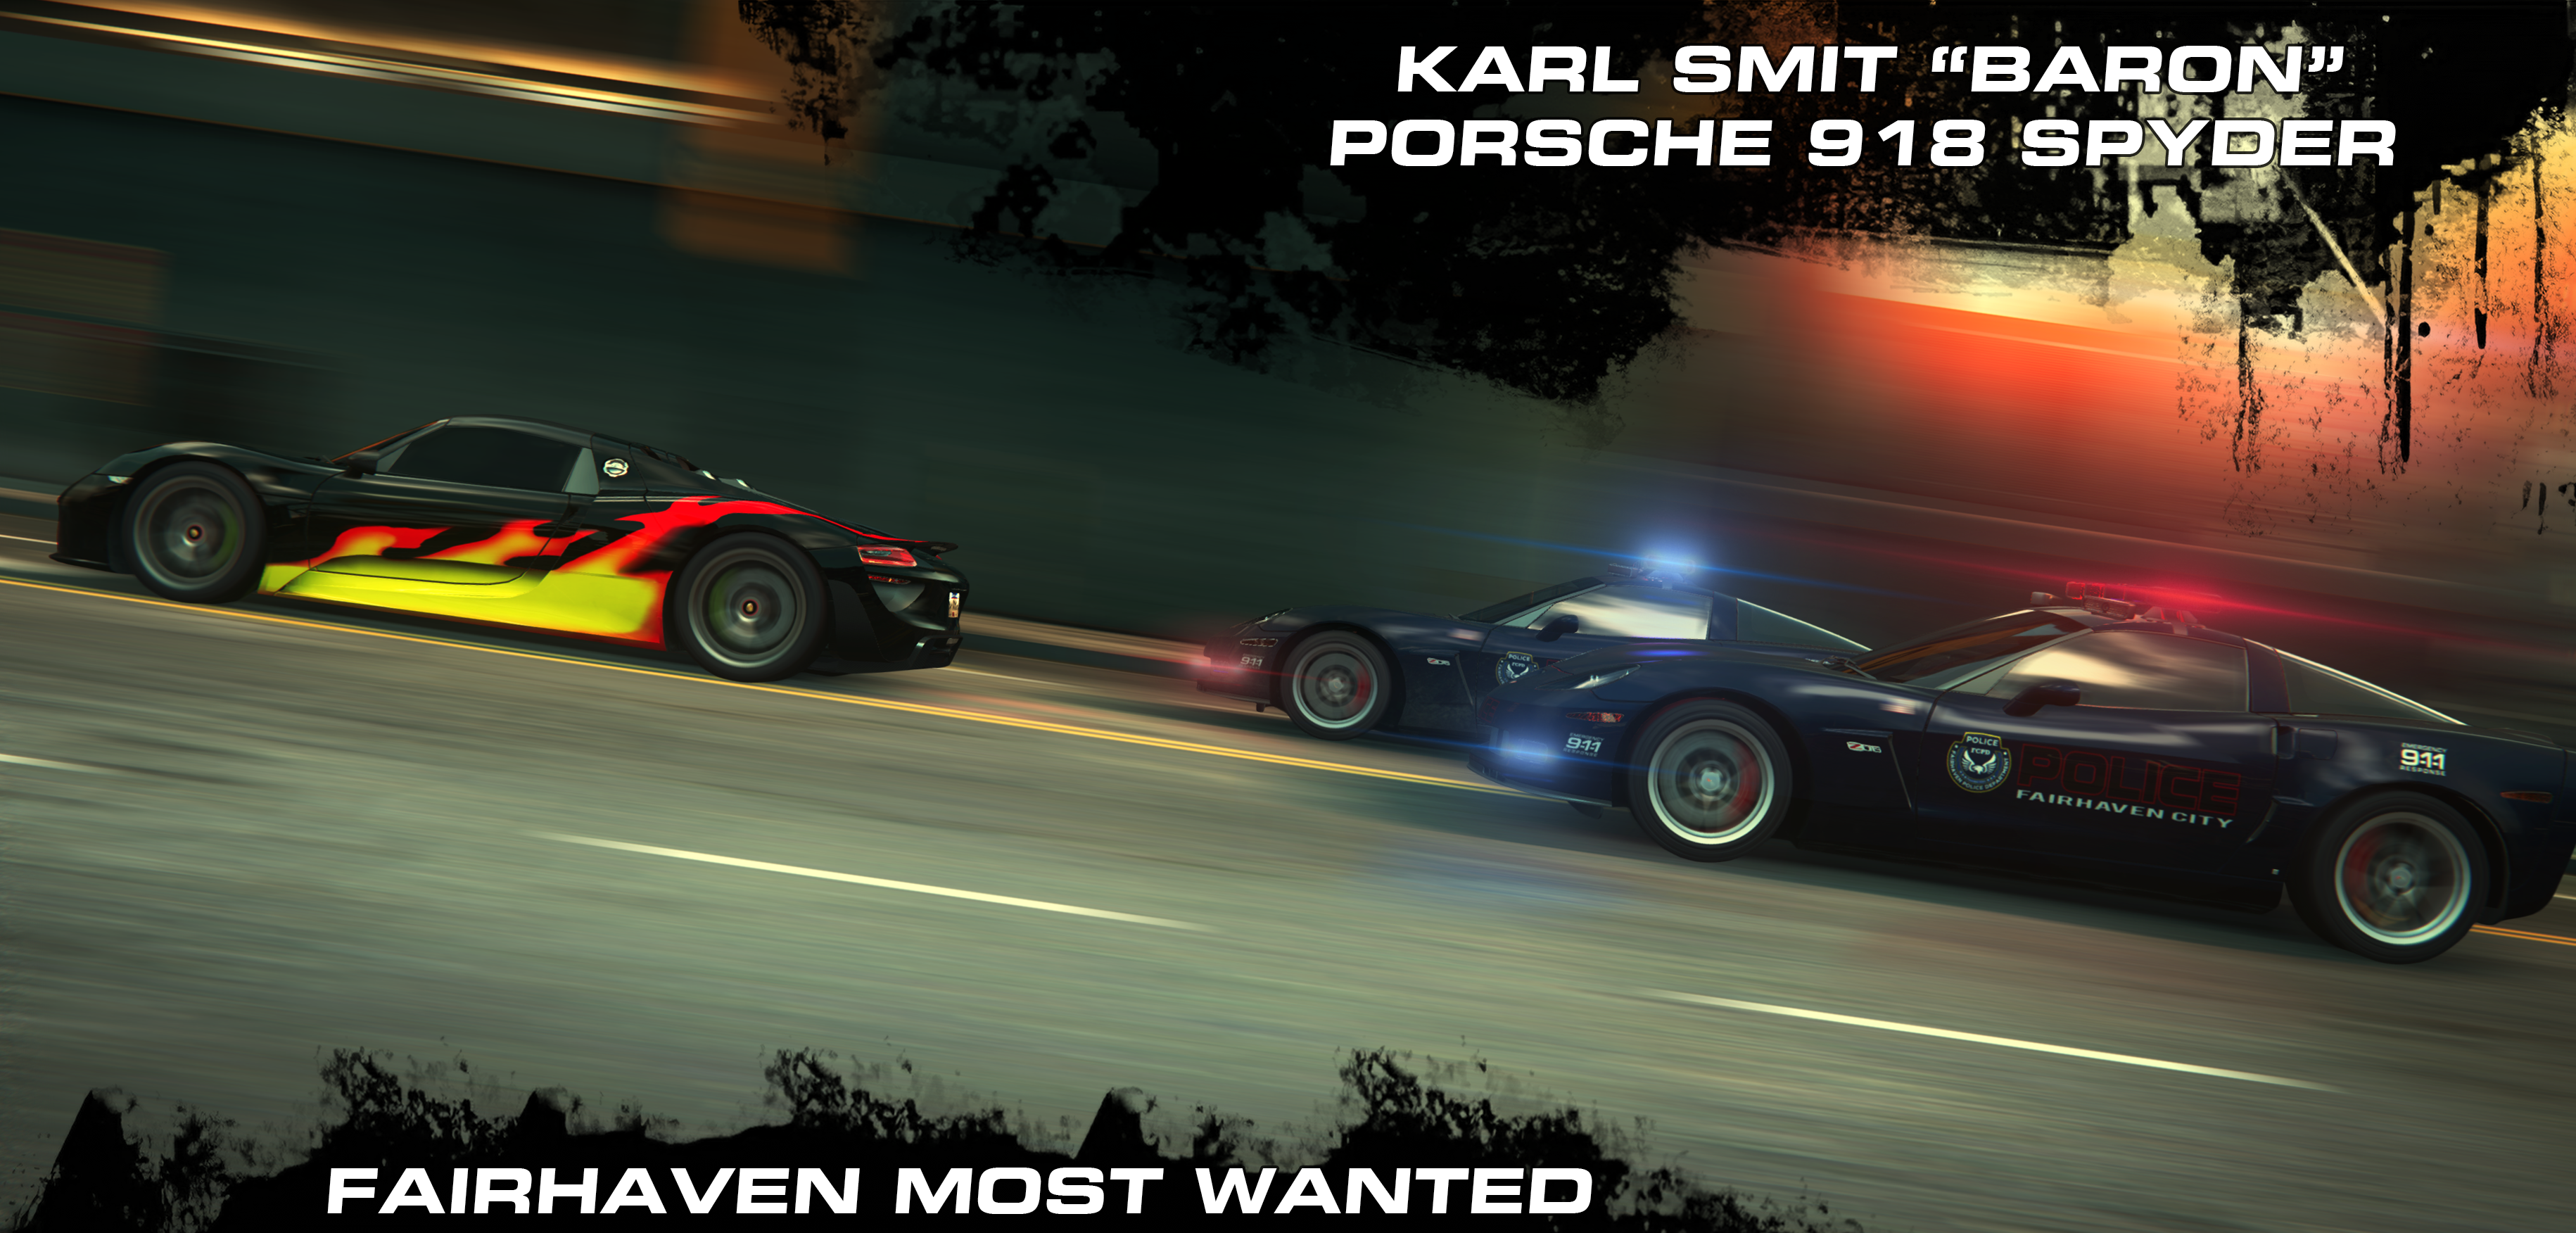 Need For Speed Most Wanted 2012 Karl Smit "Baron" Porsche 918 Spyder